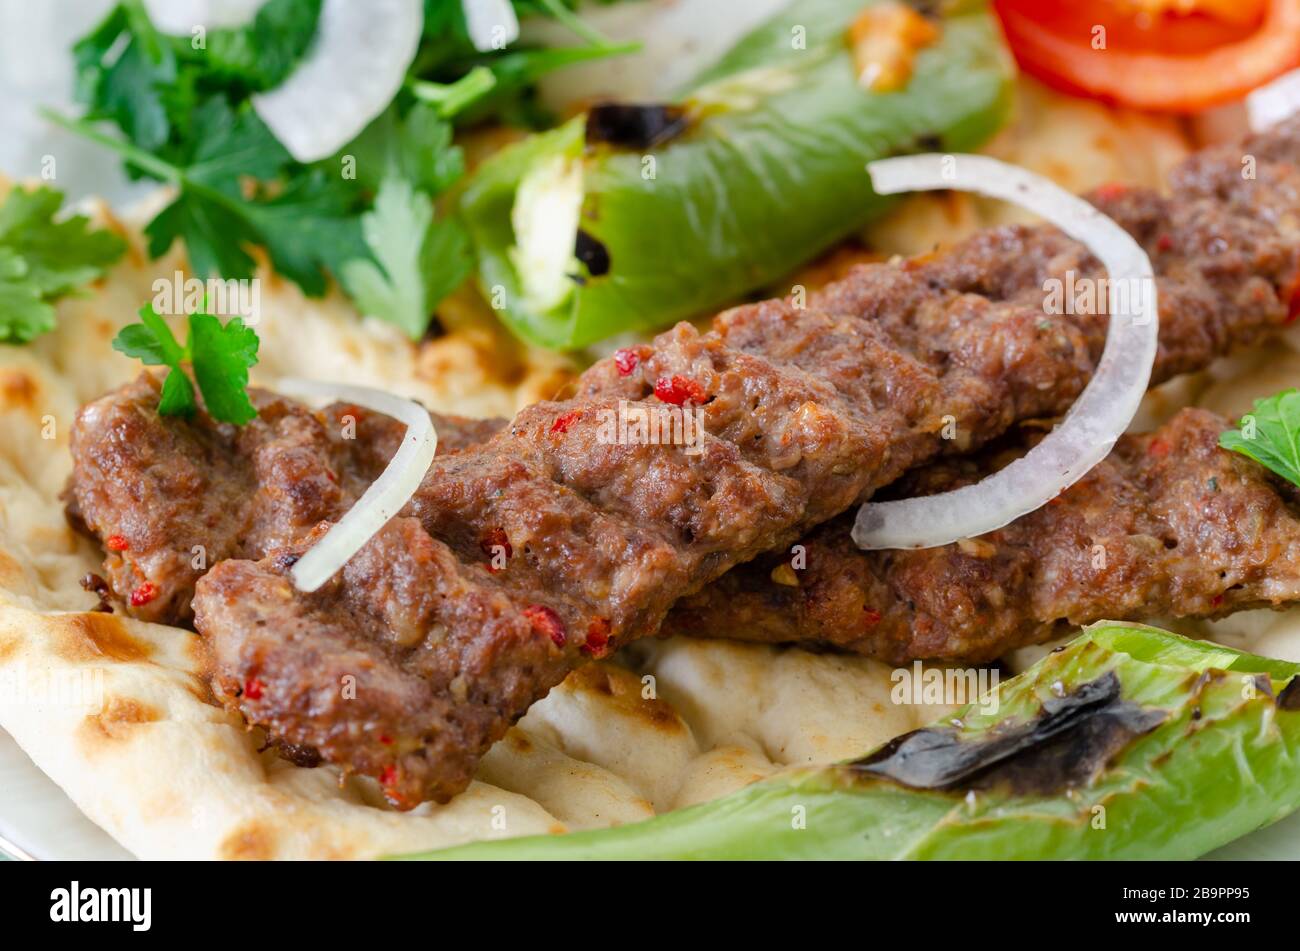 Traditional Adana Kebap with tomato and salad on a flatbread as top view. Stock Photo